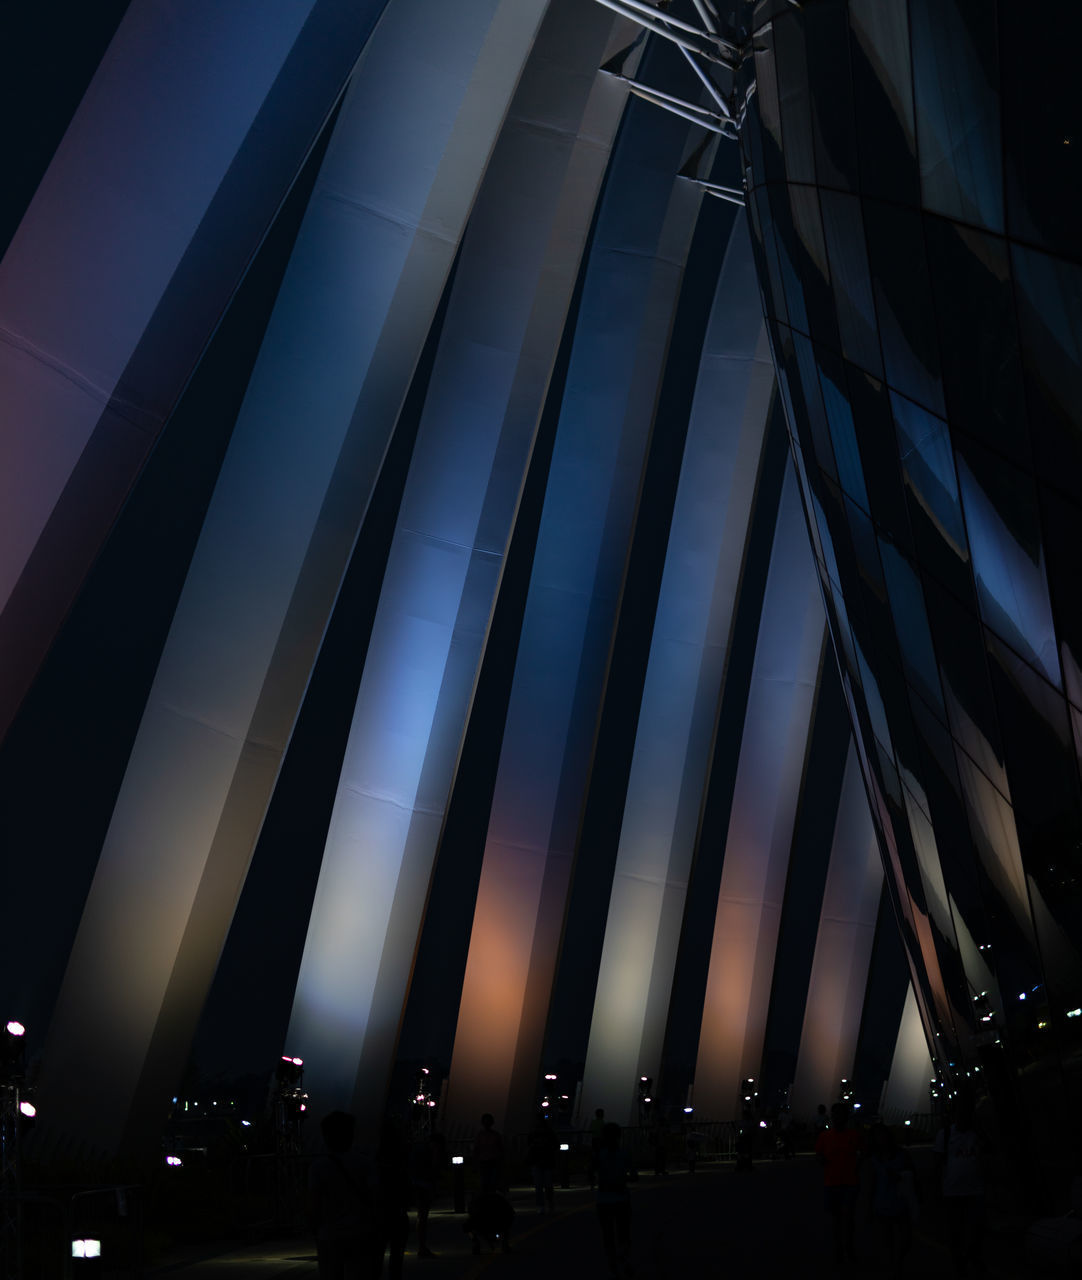 LOW ANGLE VIEW OF ILLUMINATED MODERN BUILDING AT NIGHT